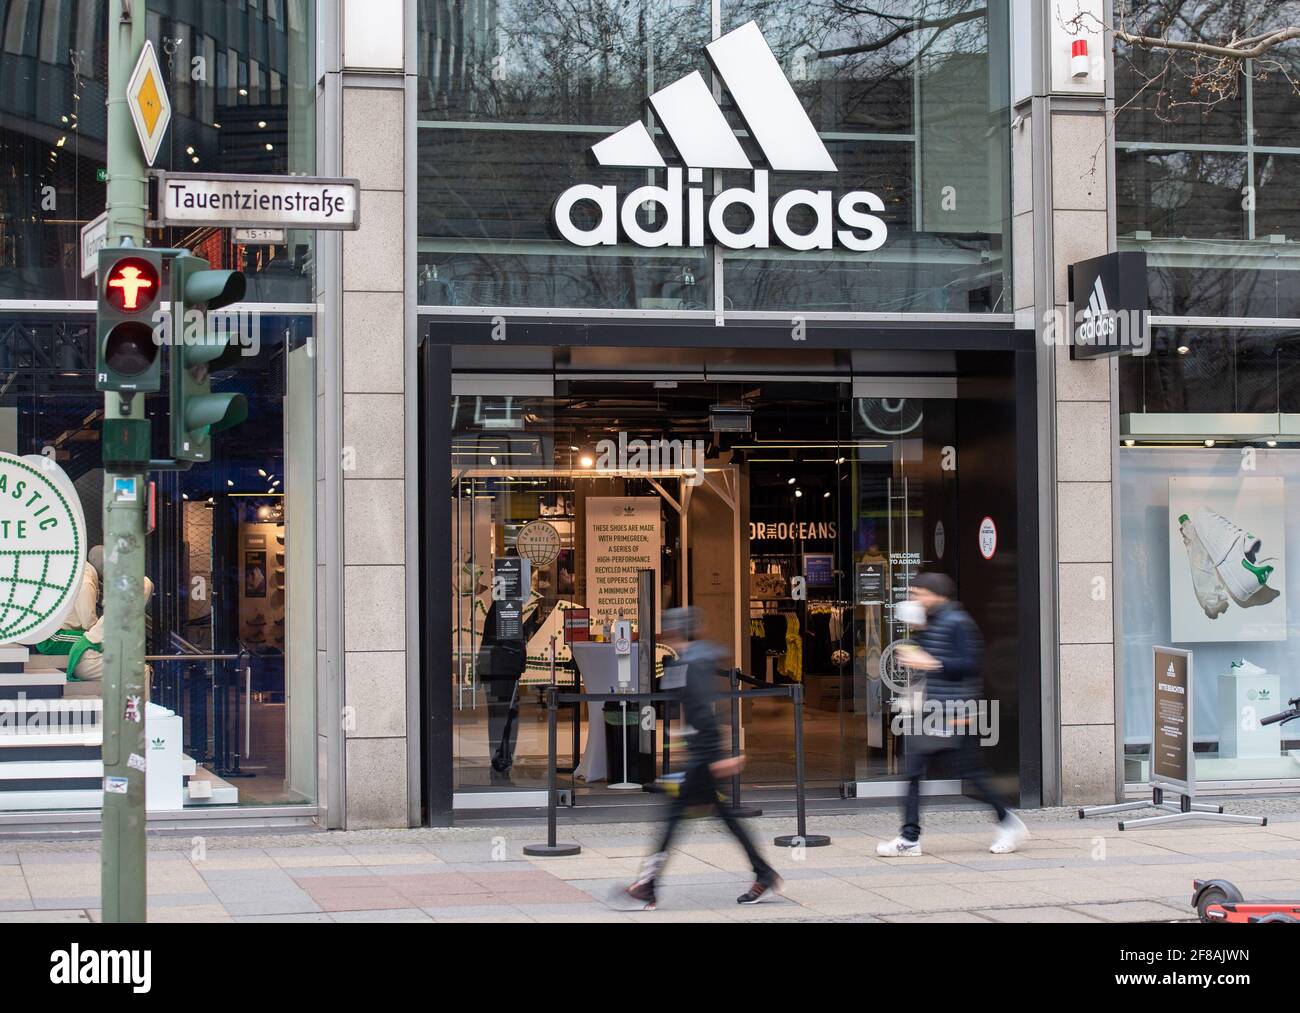 Berlin, Germany. 12th Apr, 2021. People walk past the Adidas store on  Tauentzienstrasse. Big brand manufacturers like Adidas, Miele and Co. are  increasingly bypassing retailers and selling directly to consumers. (shot  with